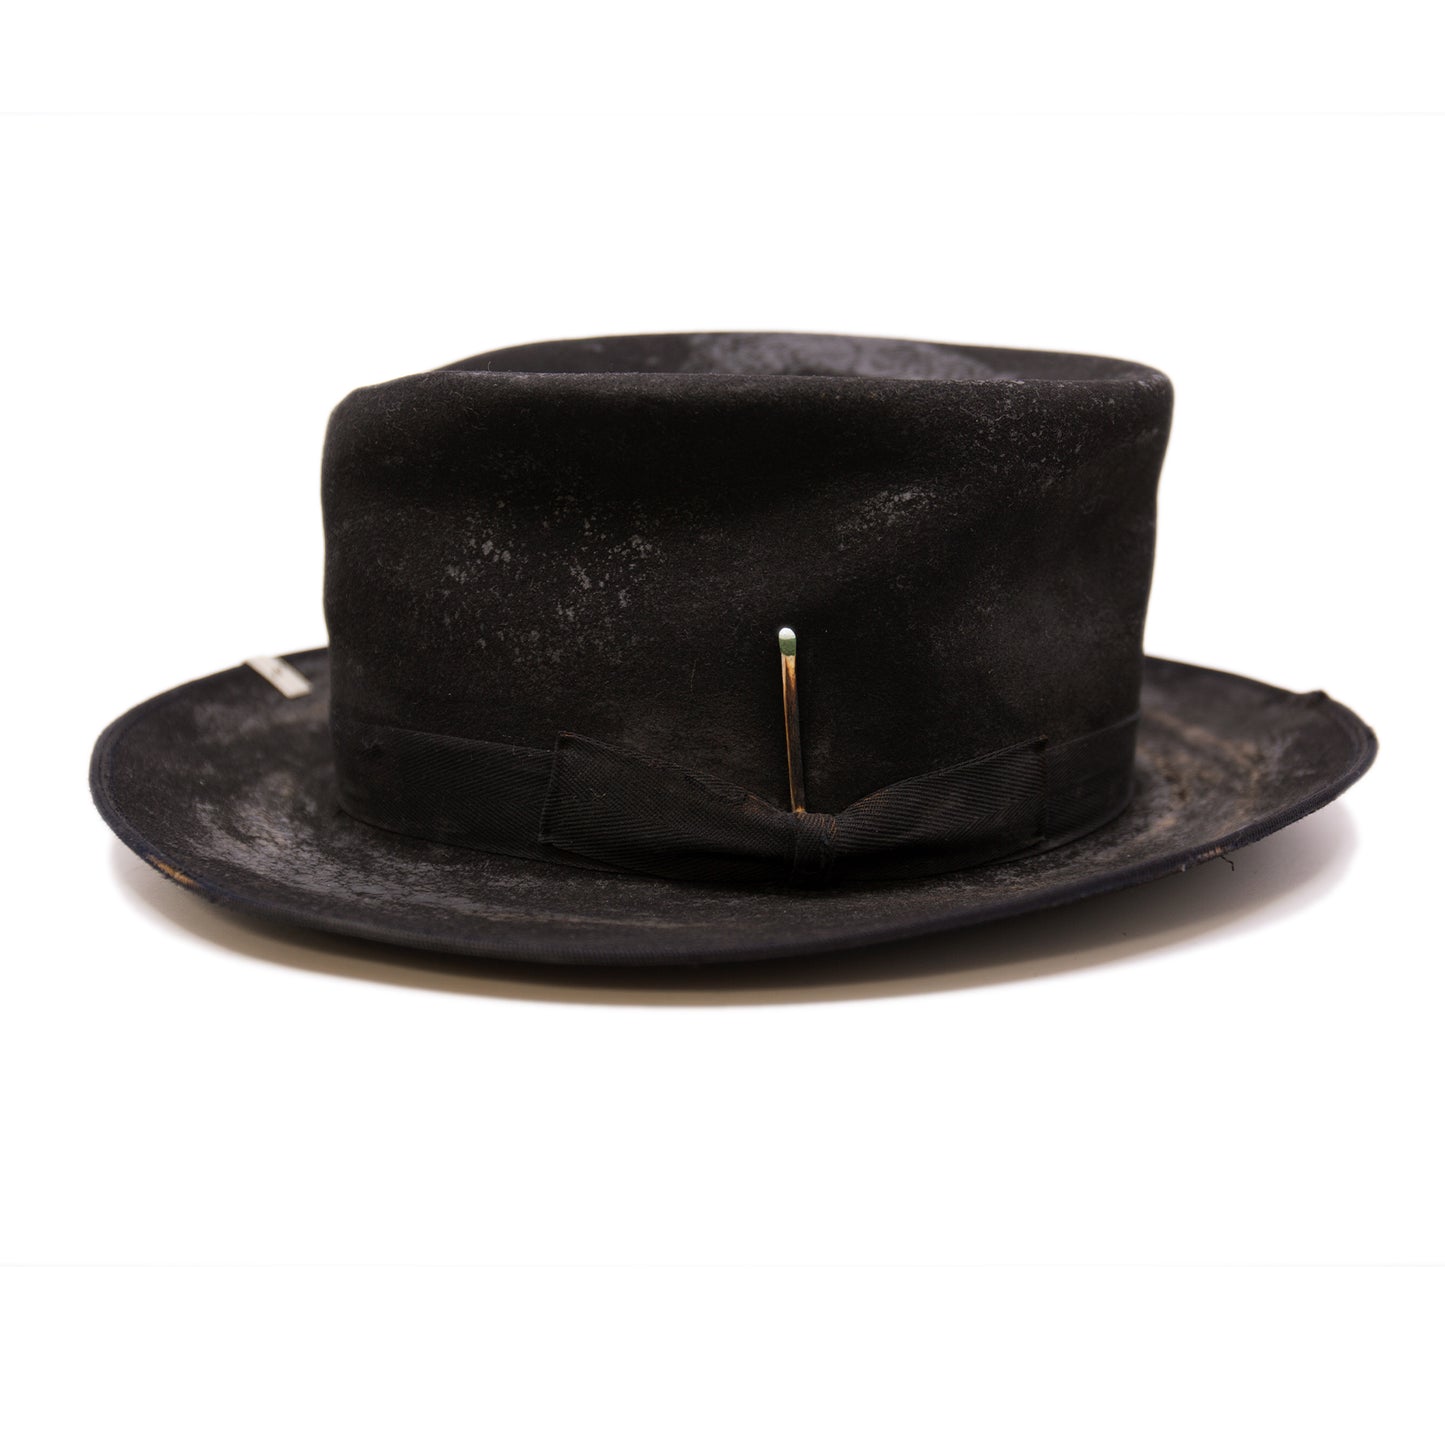 Nautholsvik  100% felt hat in Black   Dress Weight  1” tonal herringbone band & bow   Distressed and crushed  Stove top hat with baby binding    Silver NF swag clip    Flanged brim  Made in USA